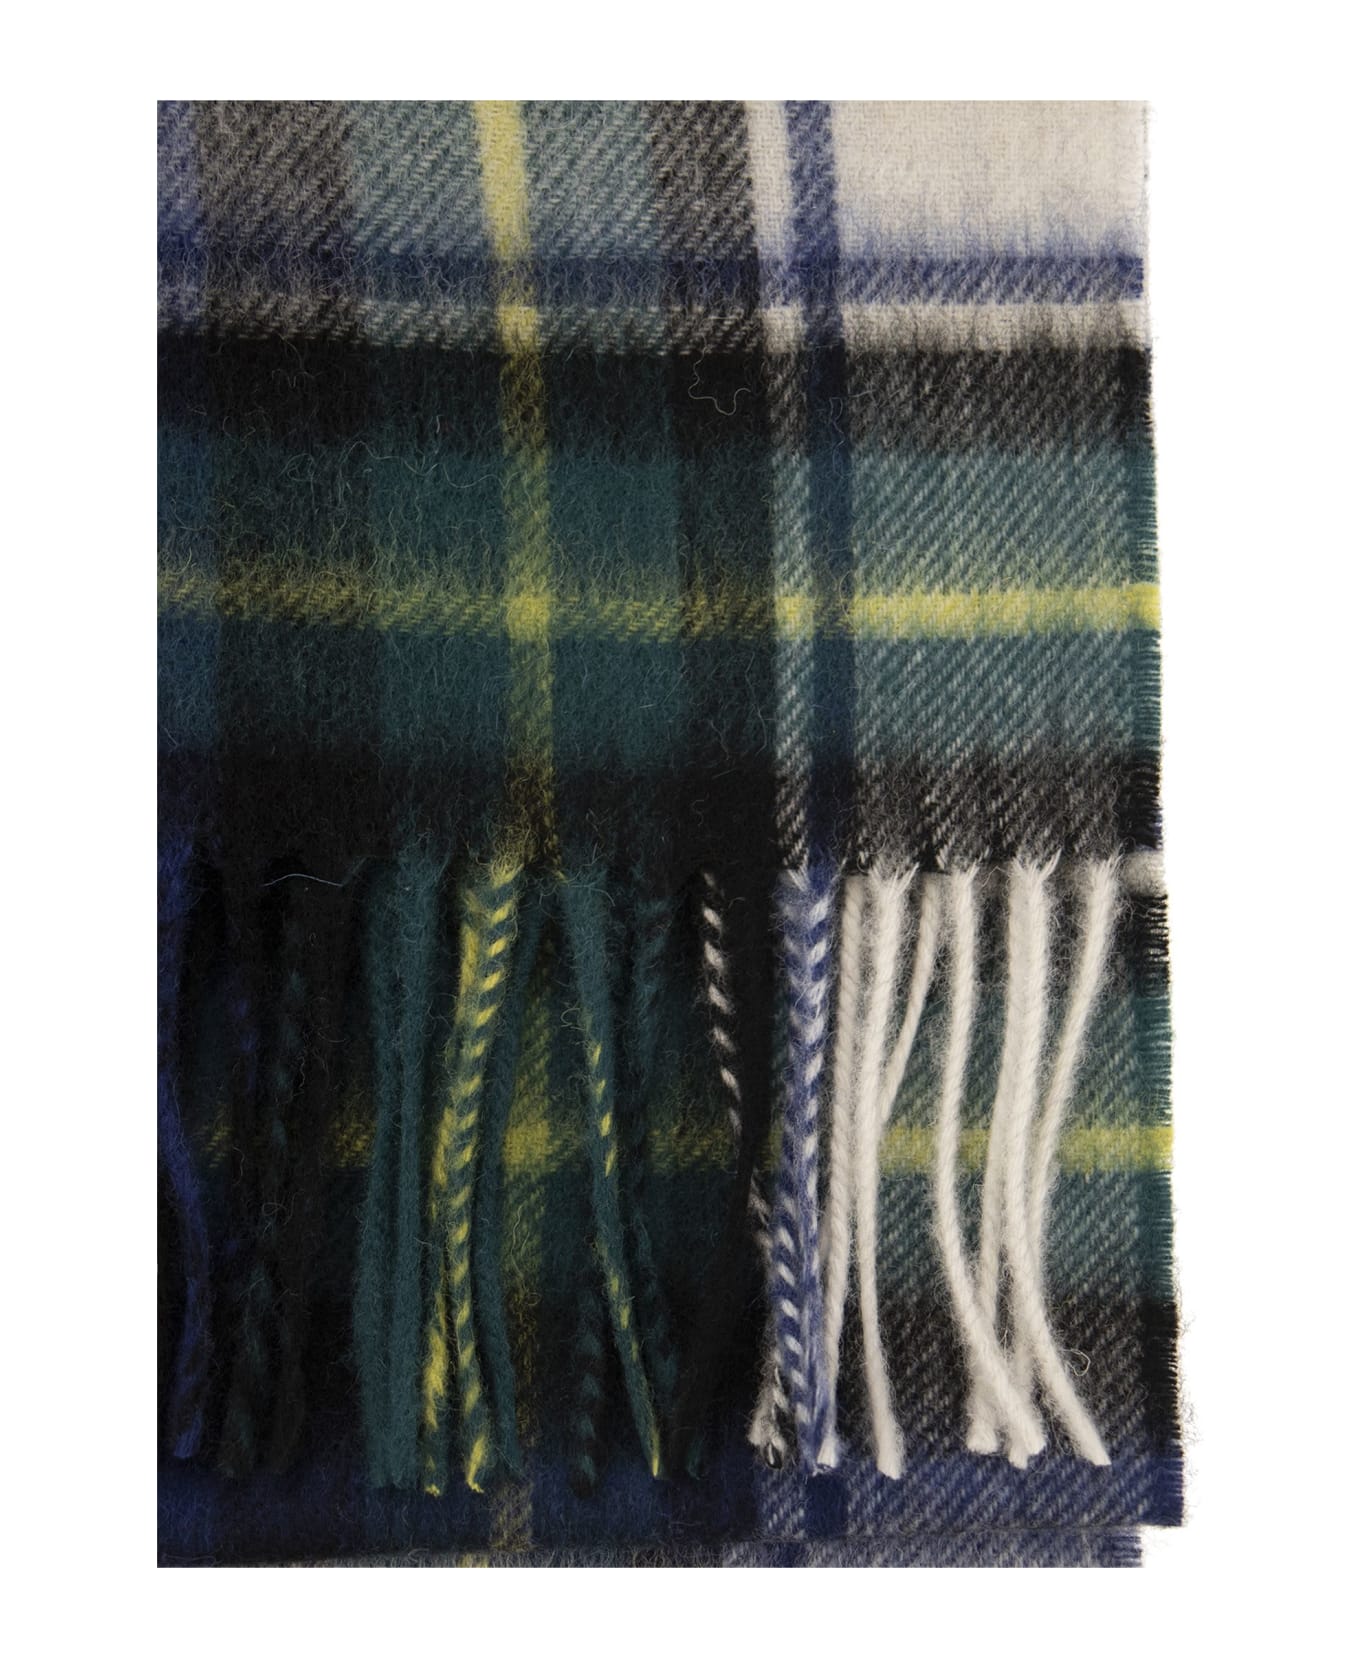 Barbour Wool Scarf Check - Green スカーフ